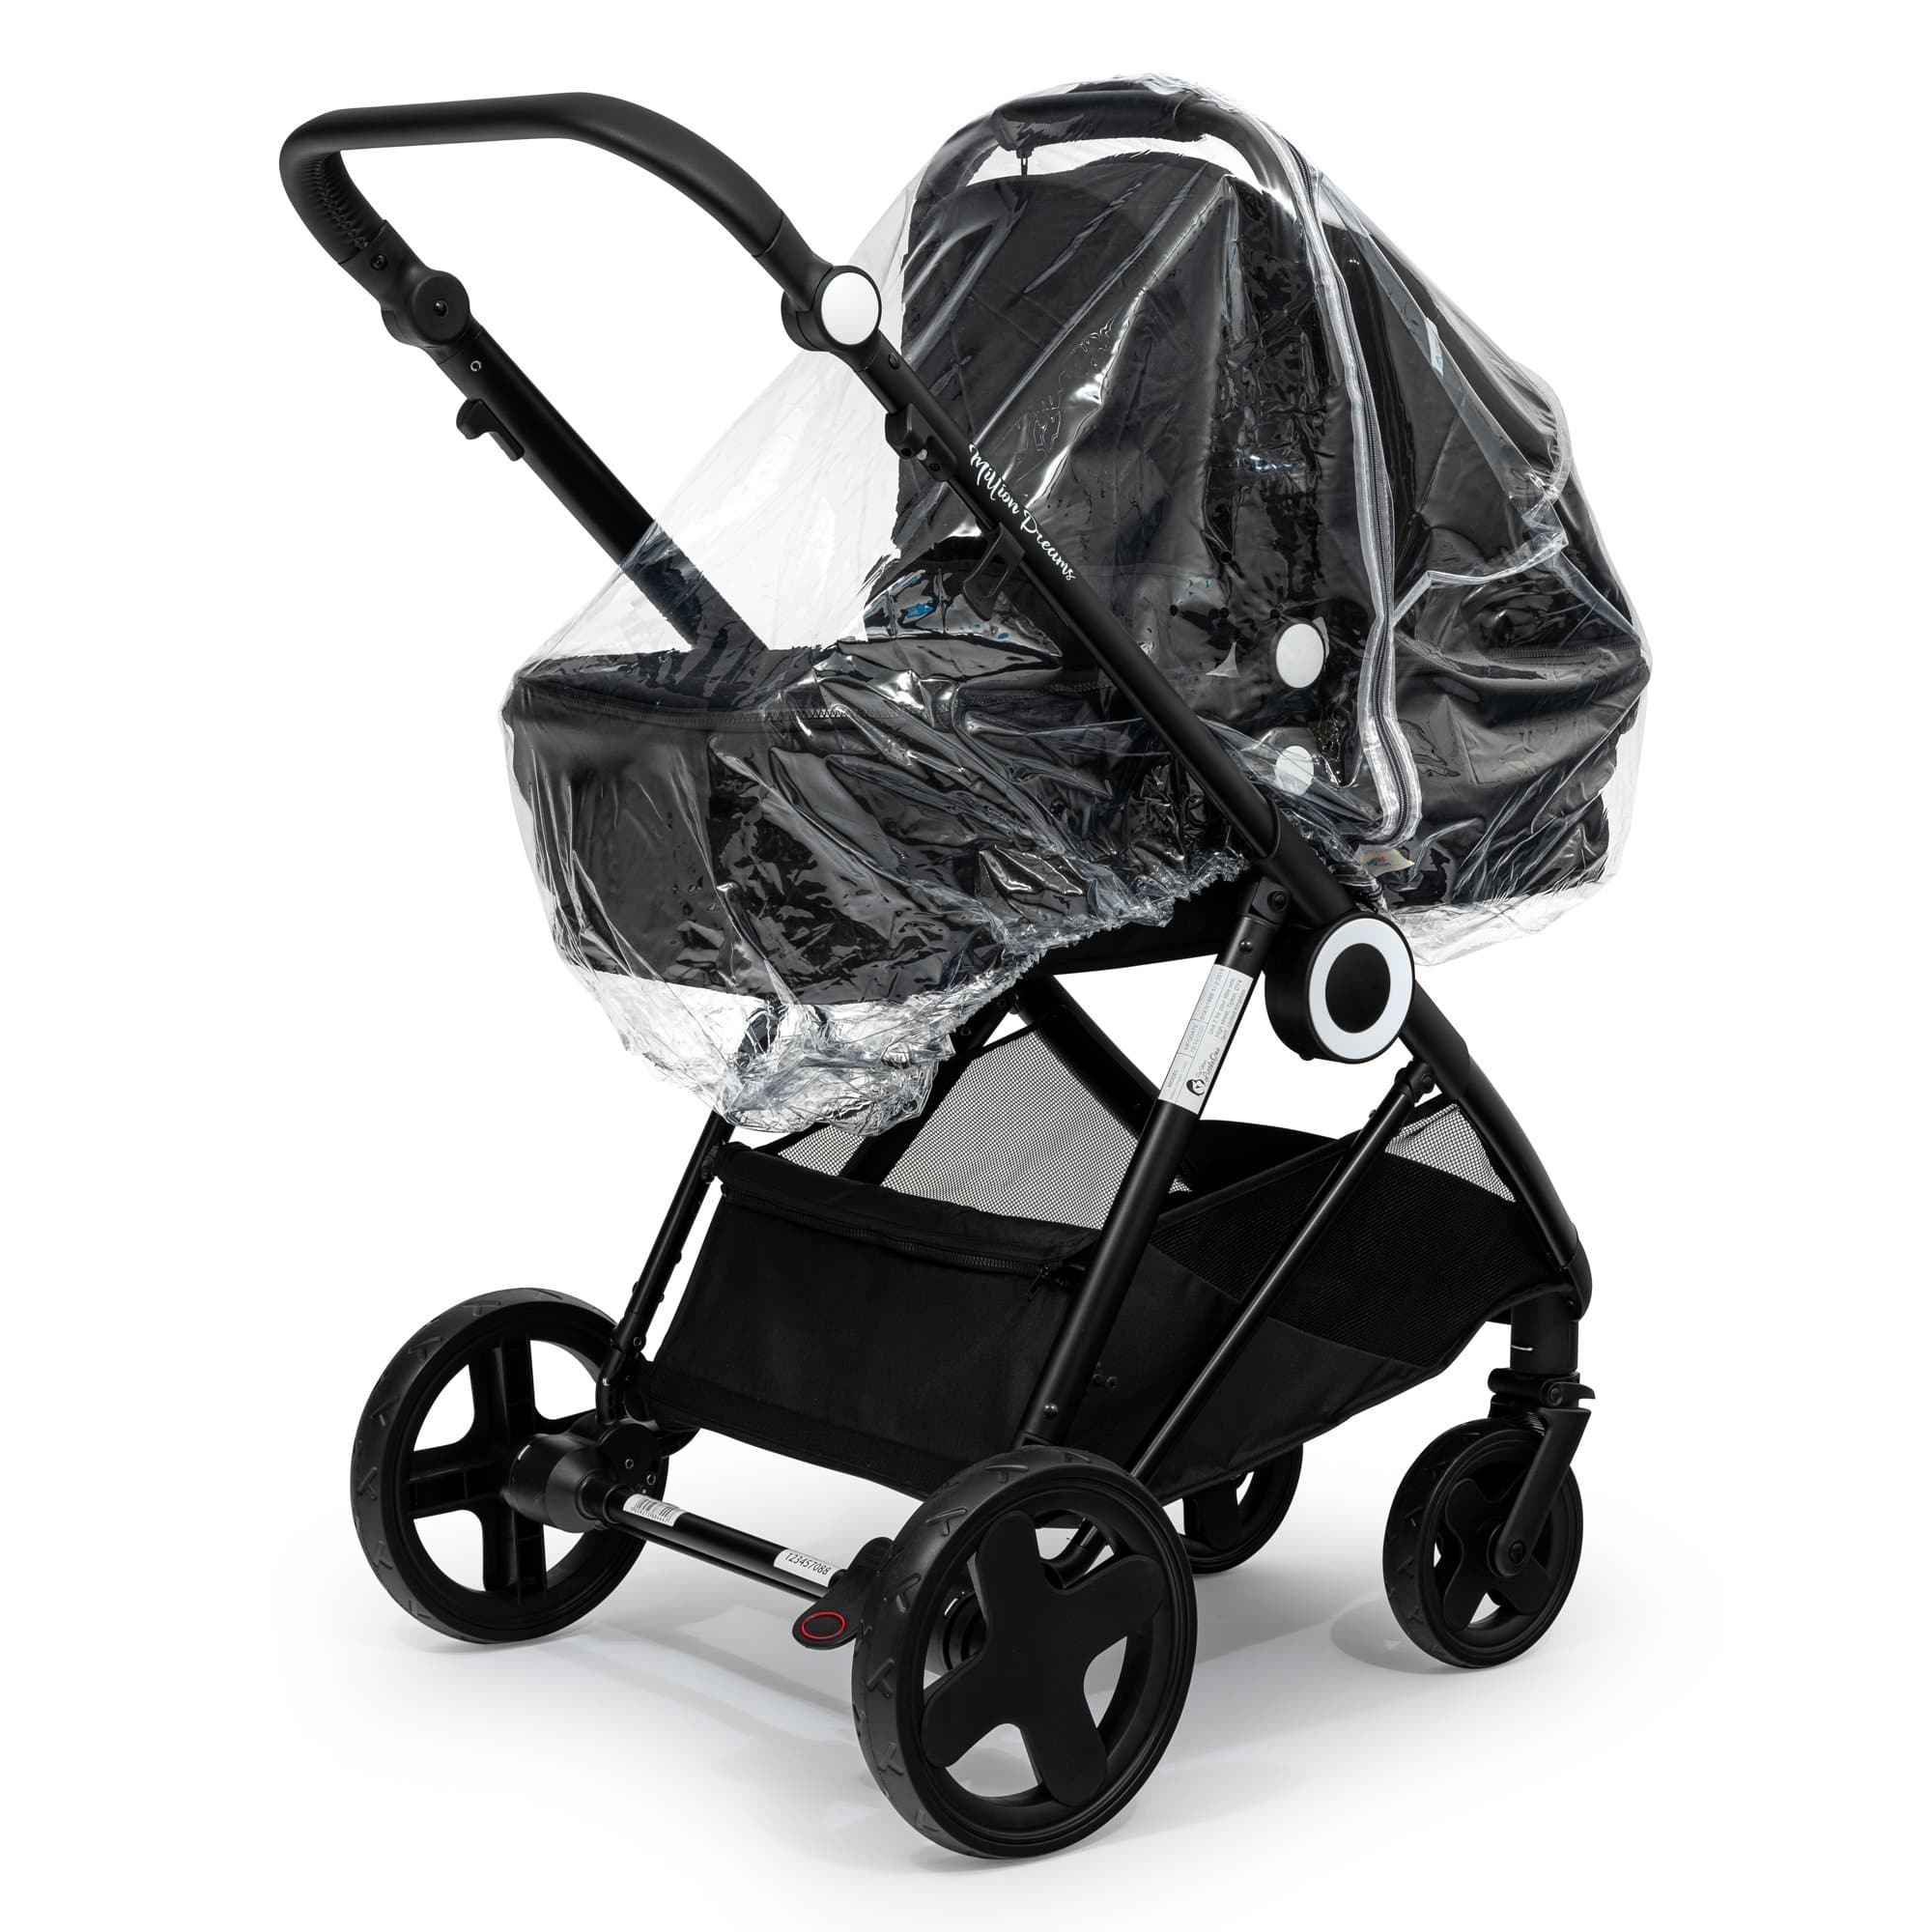 2 in 1 Rain Cover Compatible with Babybus - Fits All Models - For Your Little One